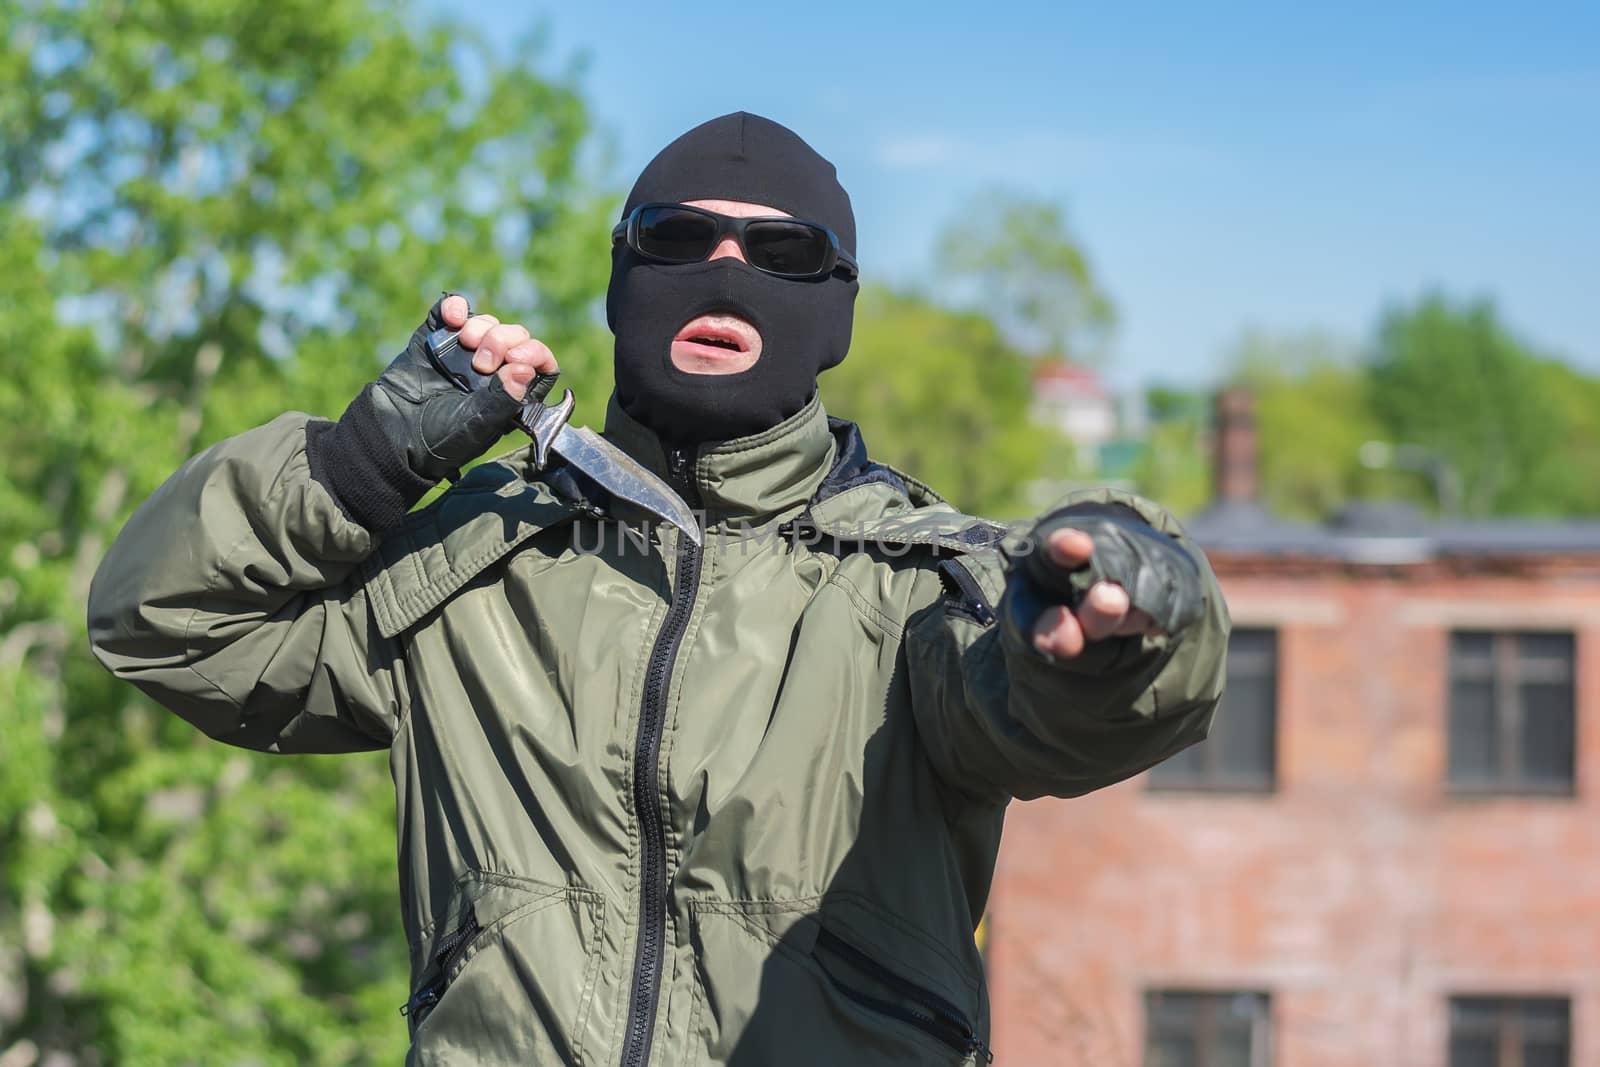 Masked bandit shows threatening gestures with a knife